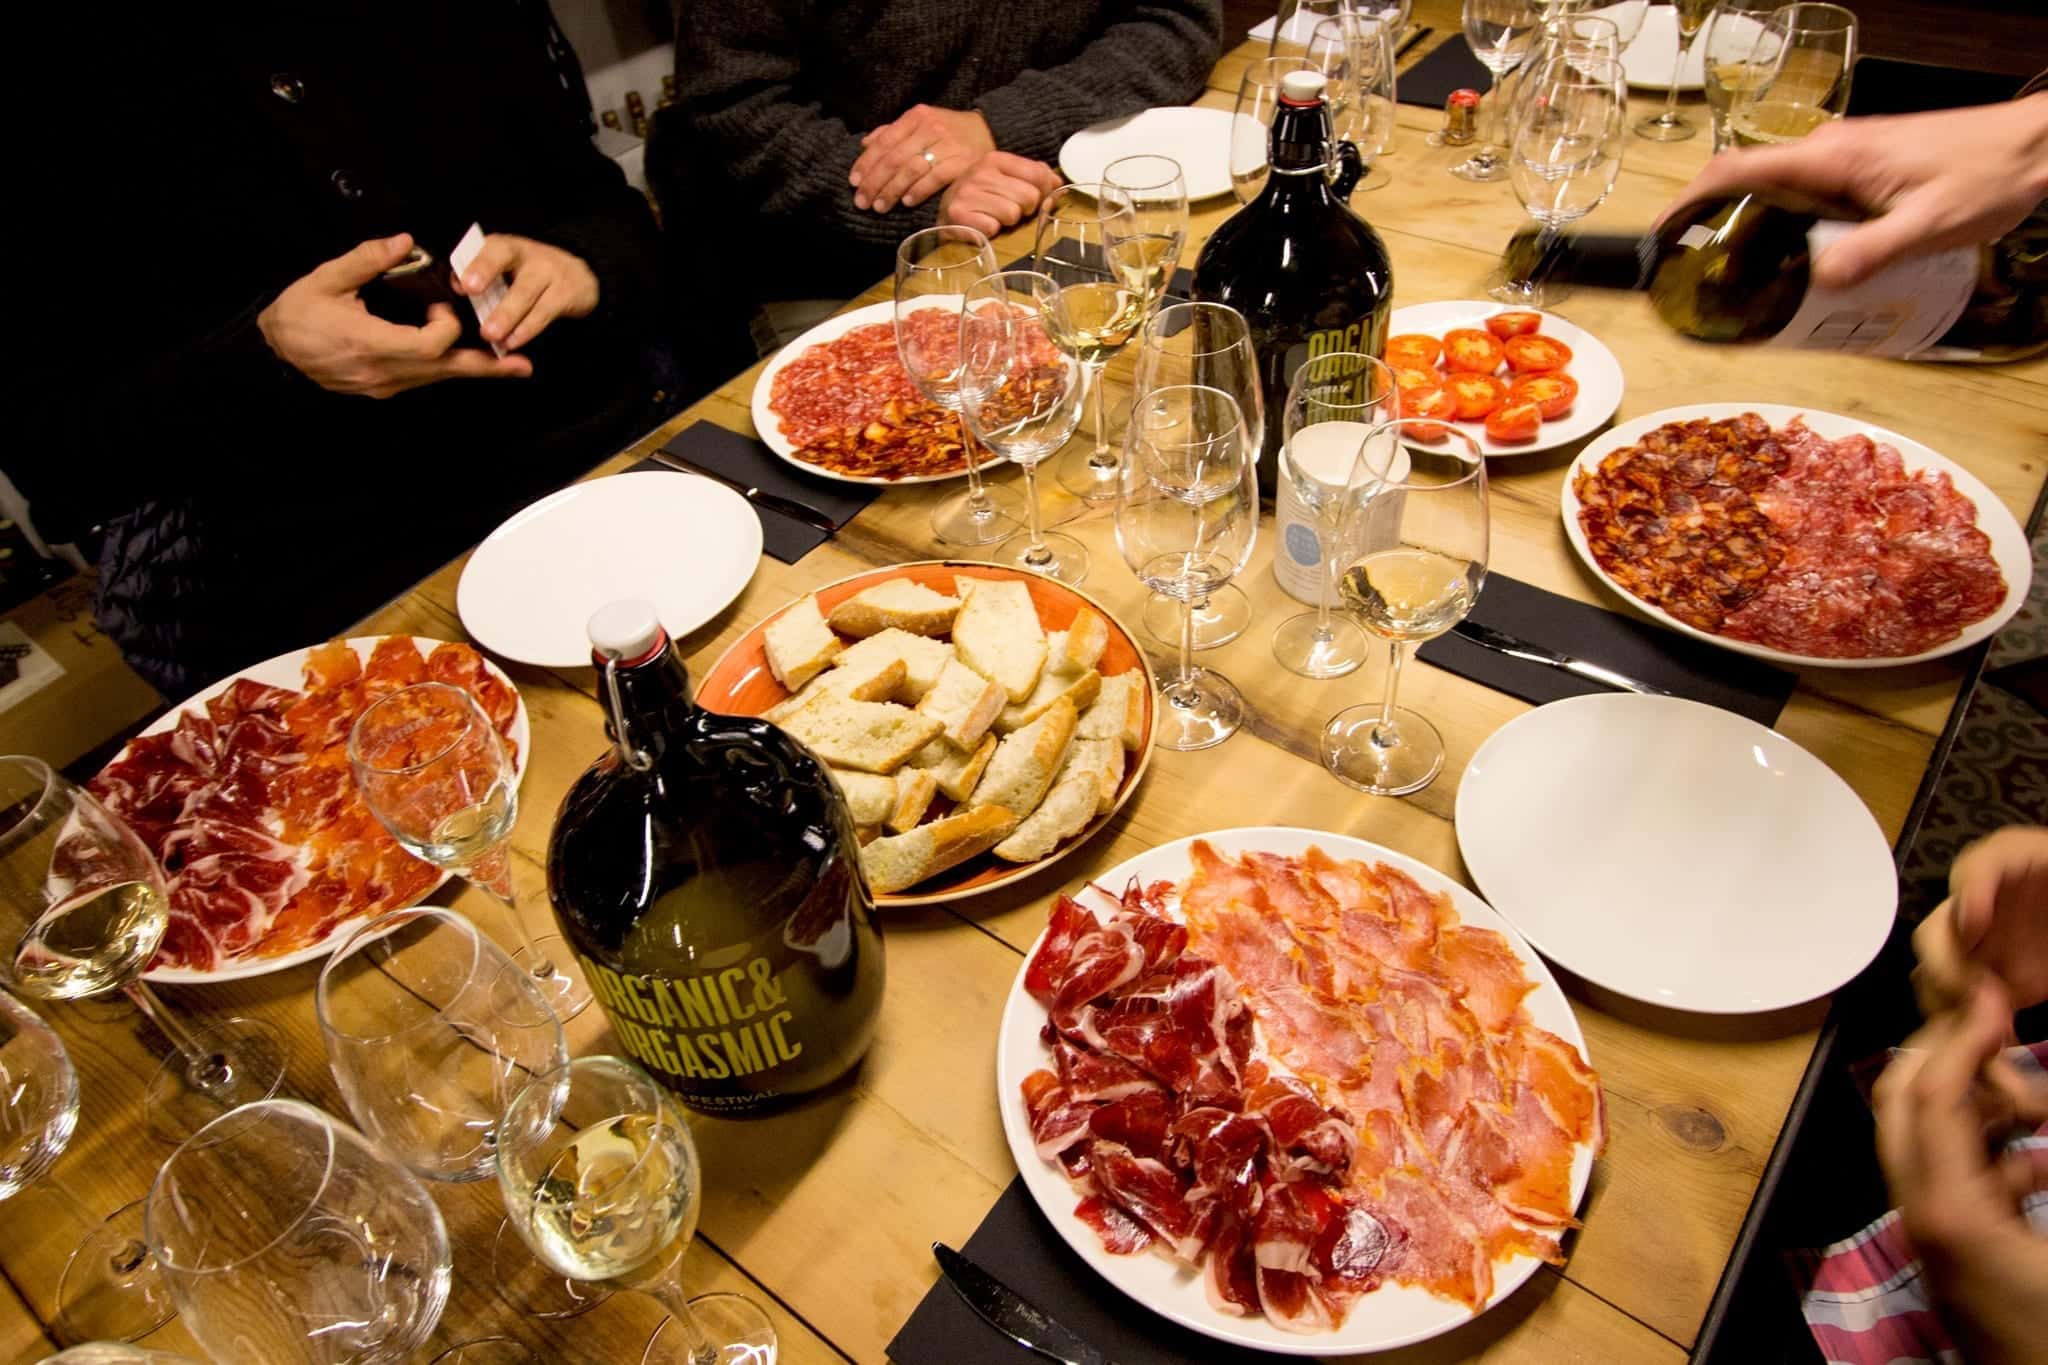 A table of tapas and wine glasses, with a hand pouring a bottle of wine